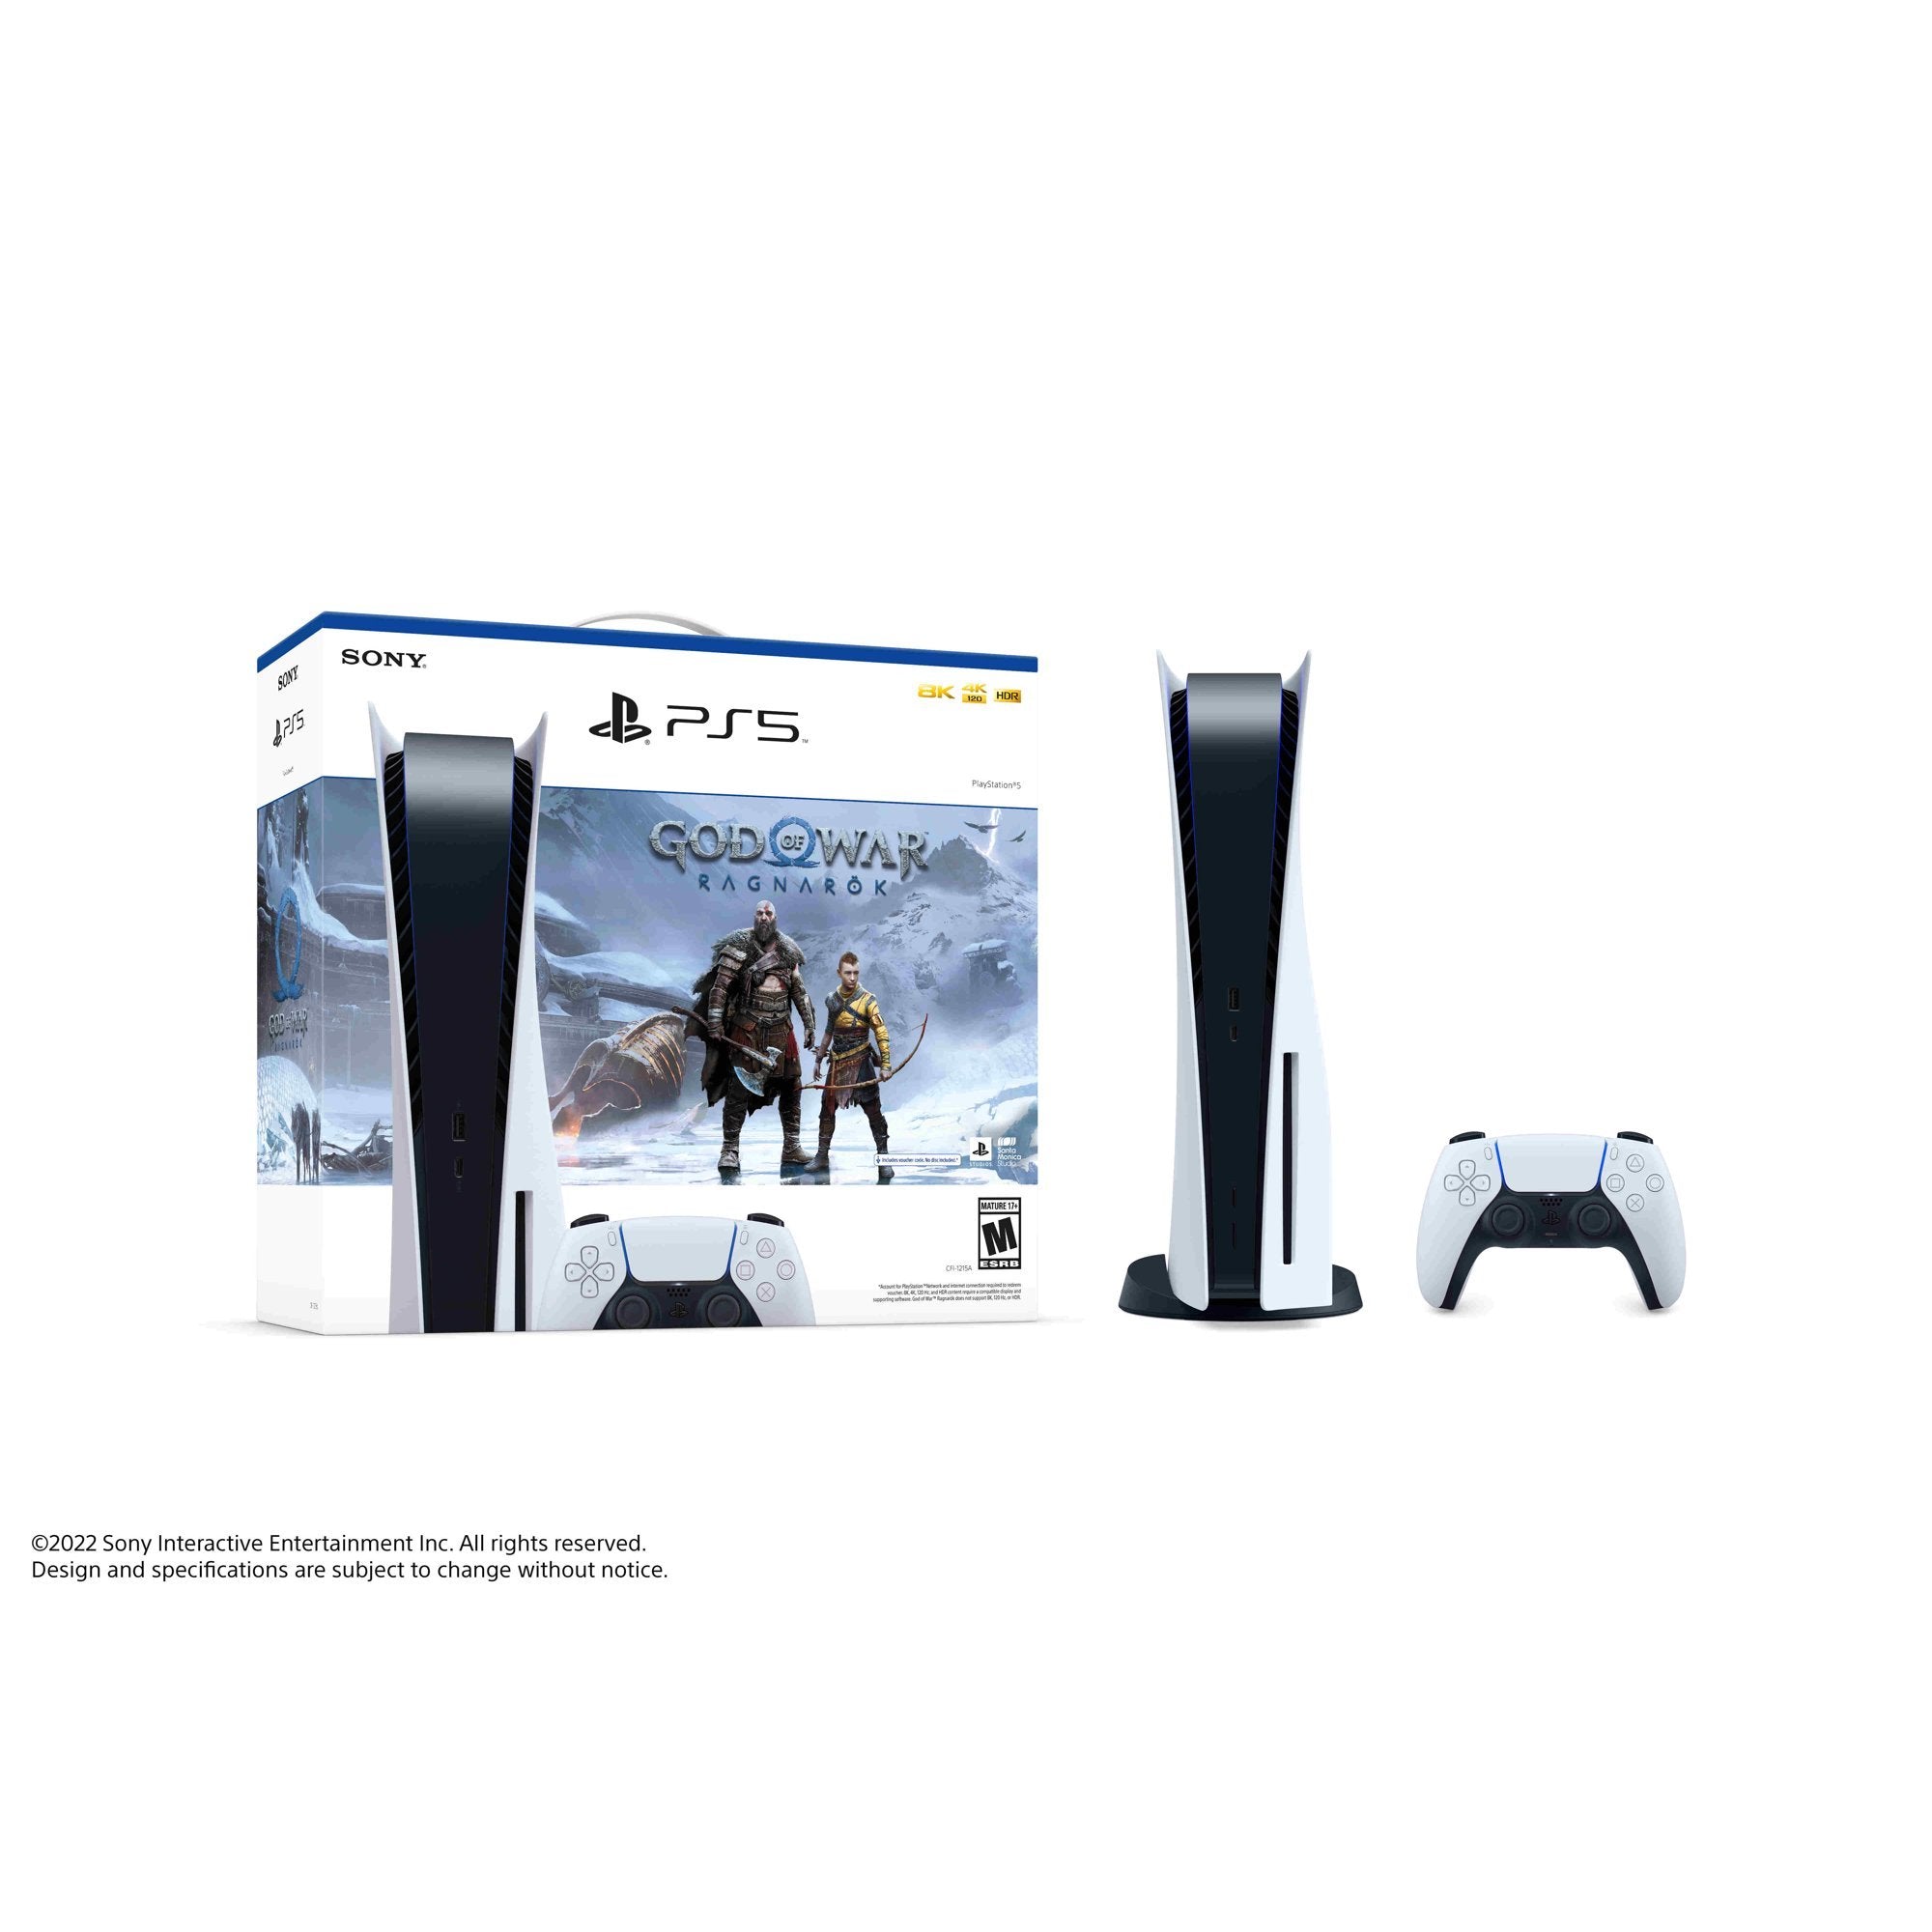 PlayStation 5 Upgraded 1.8TB Disc Edition God of War Ragnarok Bundle with Ghost of Tsushima and Mytrix Controller Case